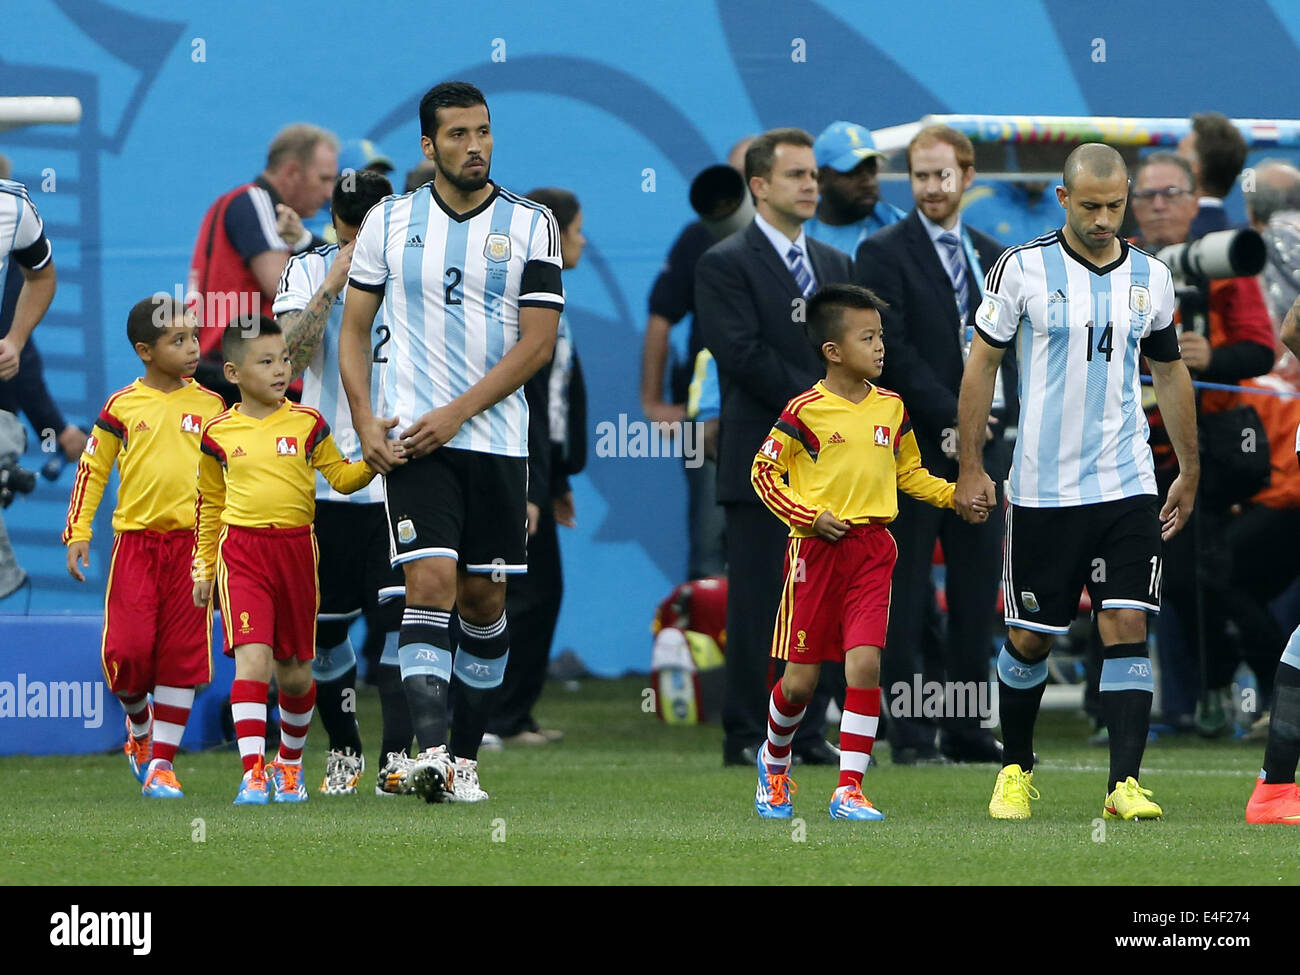 Sao Paulo, Brazil. 9th July, 2014. Argentina's Javier Mascherano (1st R) and Ezequiel Garay (3rd R) walk into the pitch with player escorts before a semifinal match between Netherlands and Argentina of 2014 FIFA World Cup at the Arena de Sao Paulo Stadium in Sao Paulo, Brazil, on July 9, 2014. Credit:  Zhou Lei/Xinhua/Alamy Live News Stock Photo